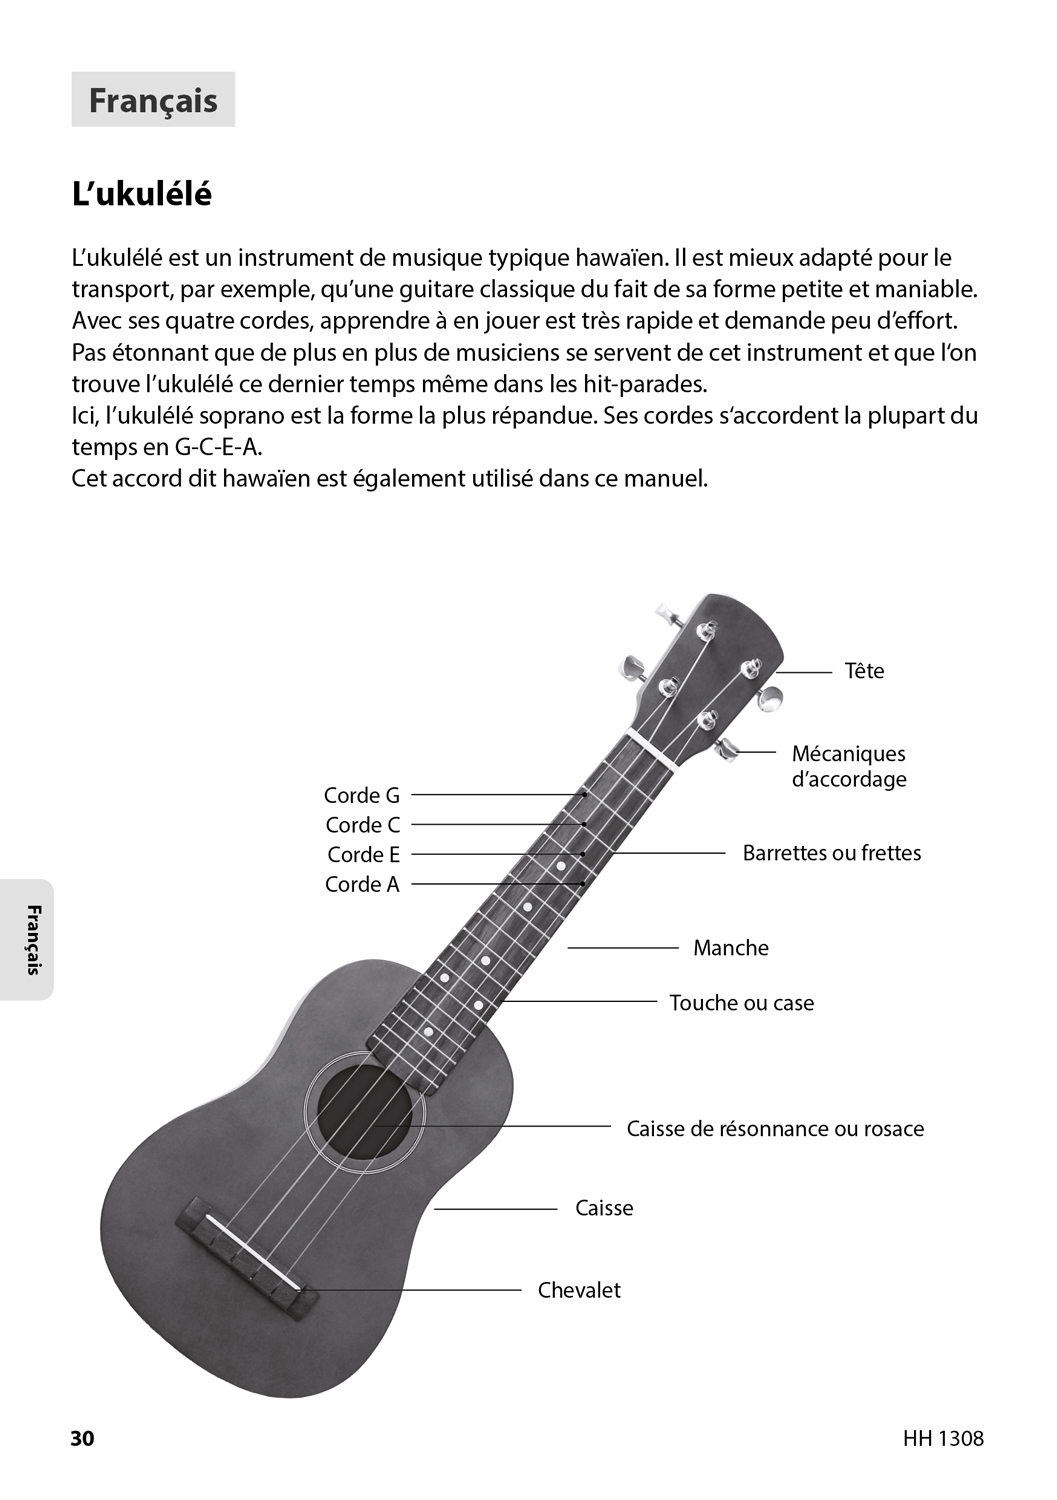 Ukulele - Learn to play quick and easy, 4 languages Product Photos 7